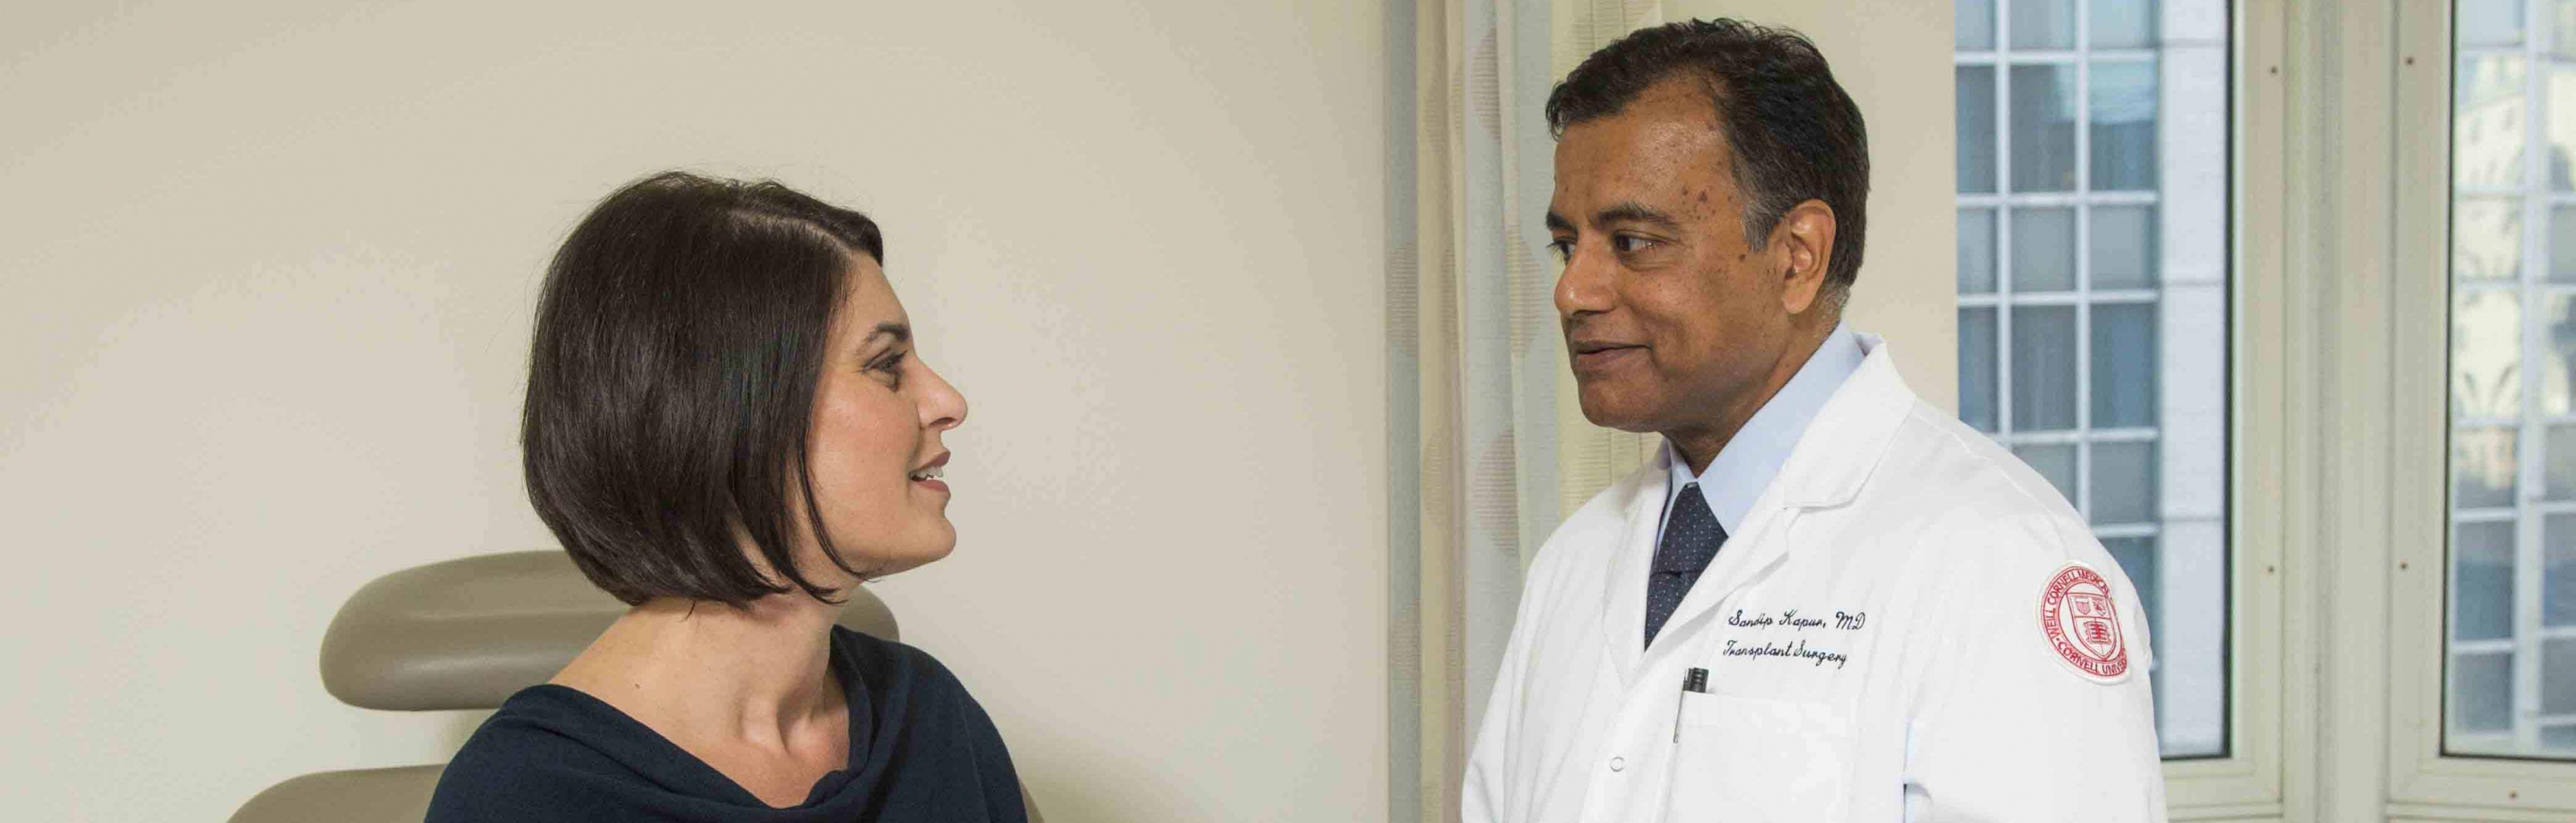 Dr. Sandip Kapur interacts with a patient.